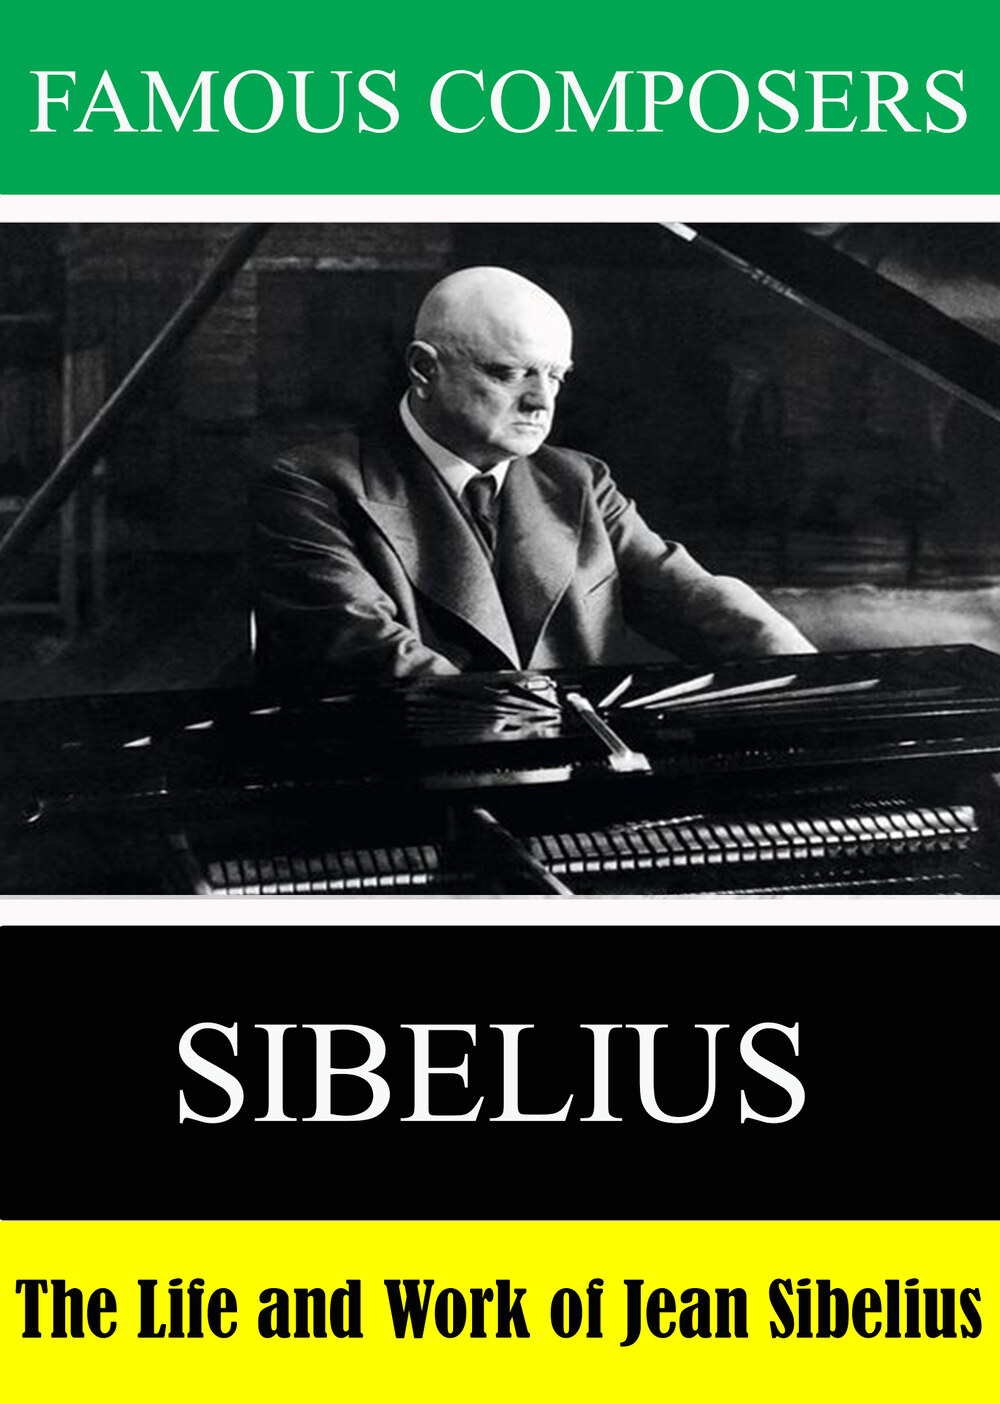 L7929 - Famous Composers: The Life and Work of Jean Sibelius